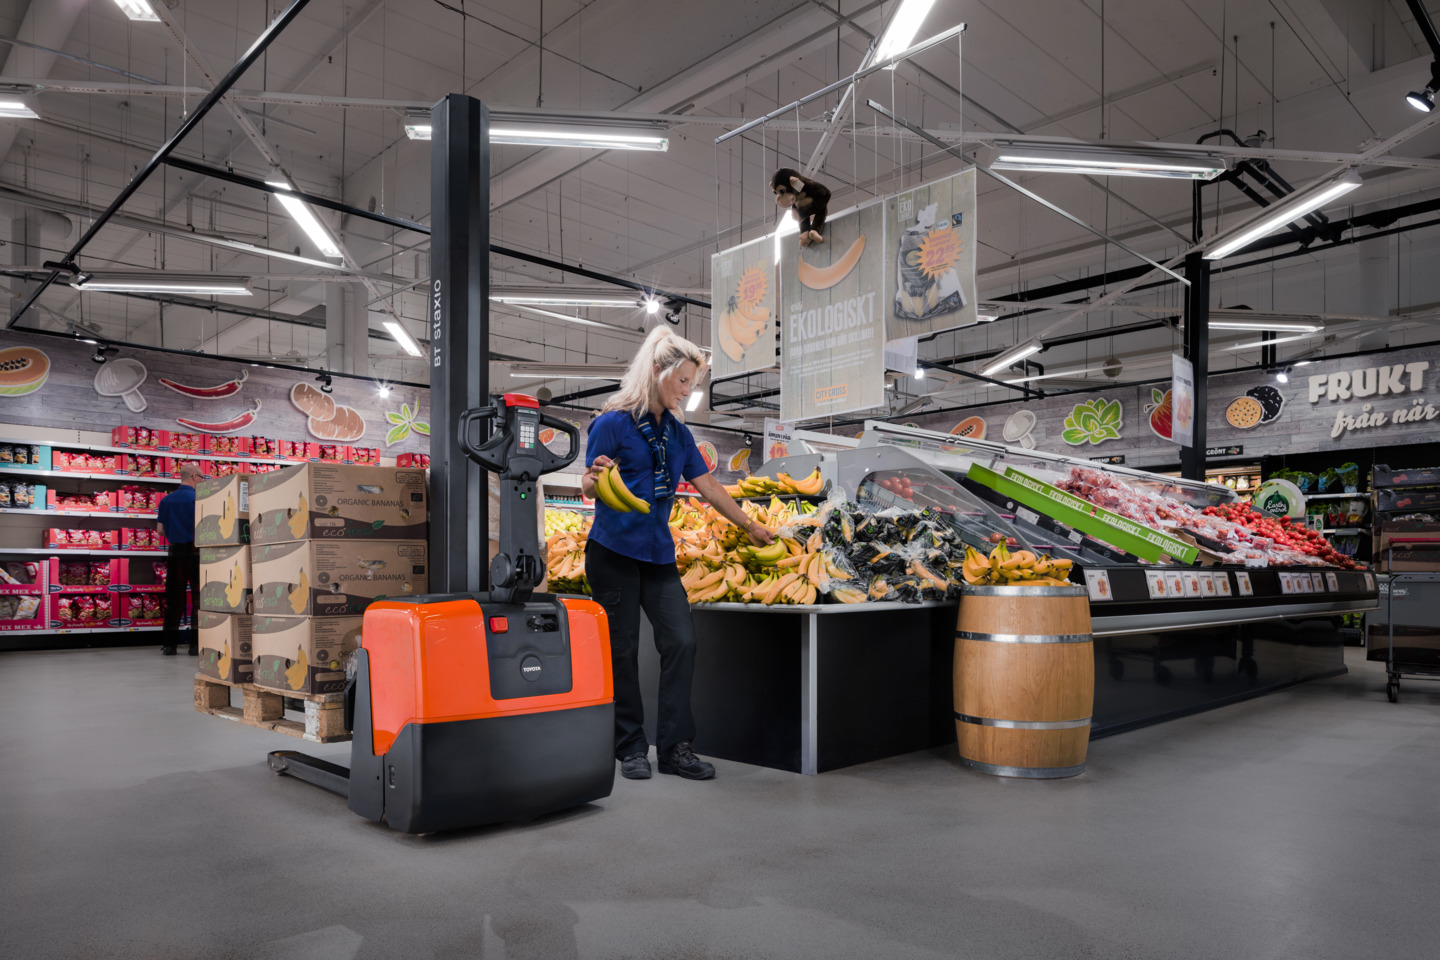 Toyota powered stacker HWE100 utilized as a workbench in a retail environment